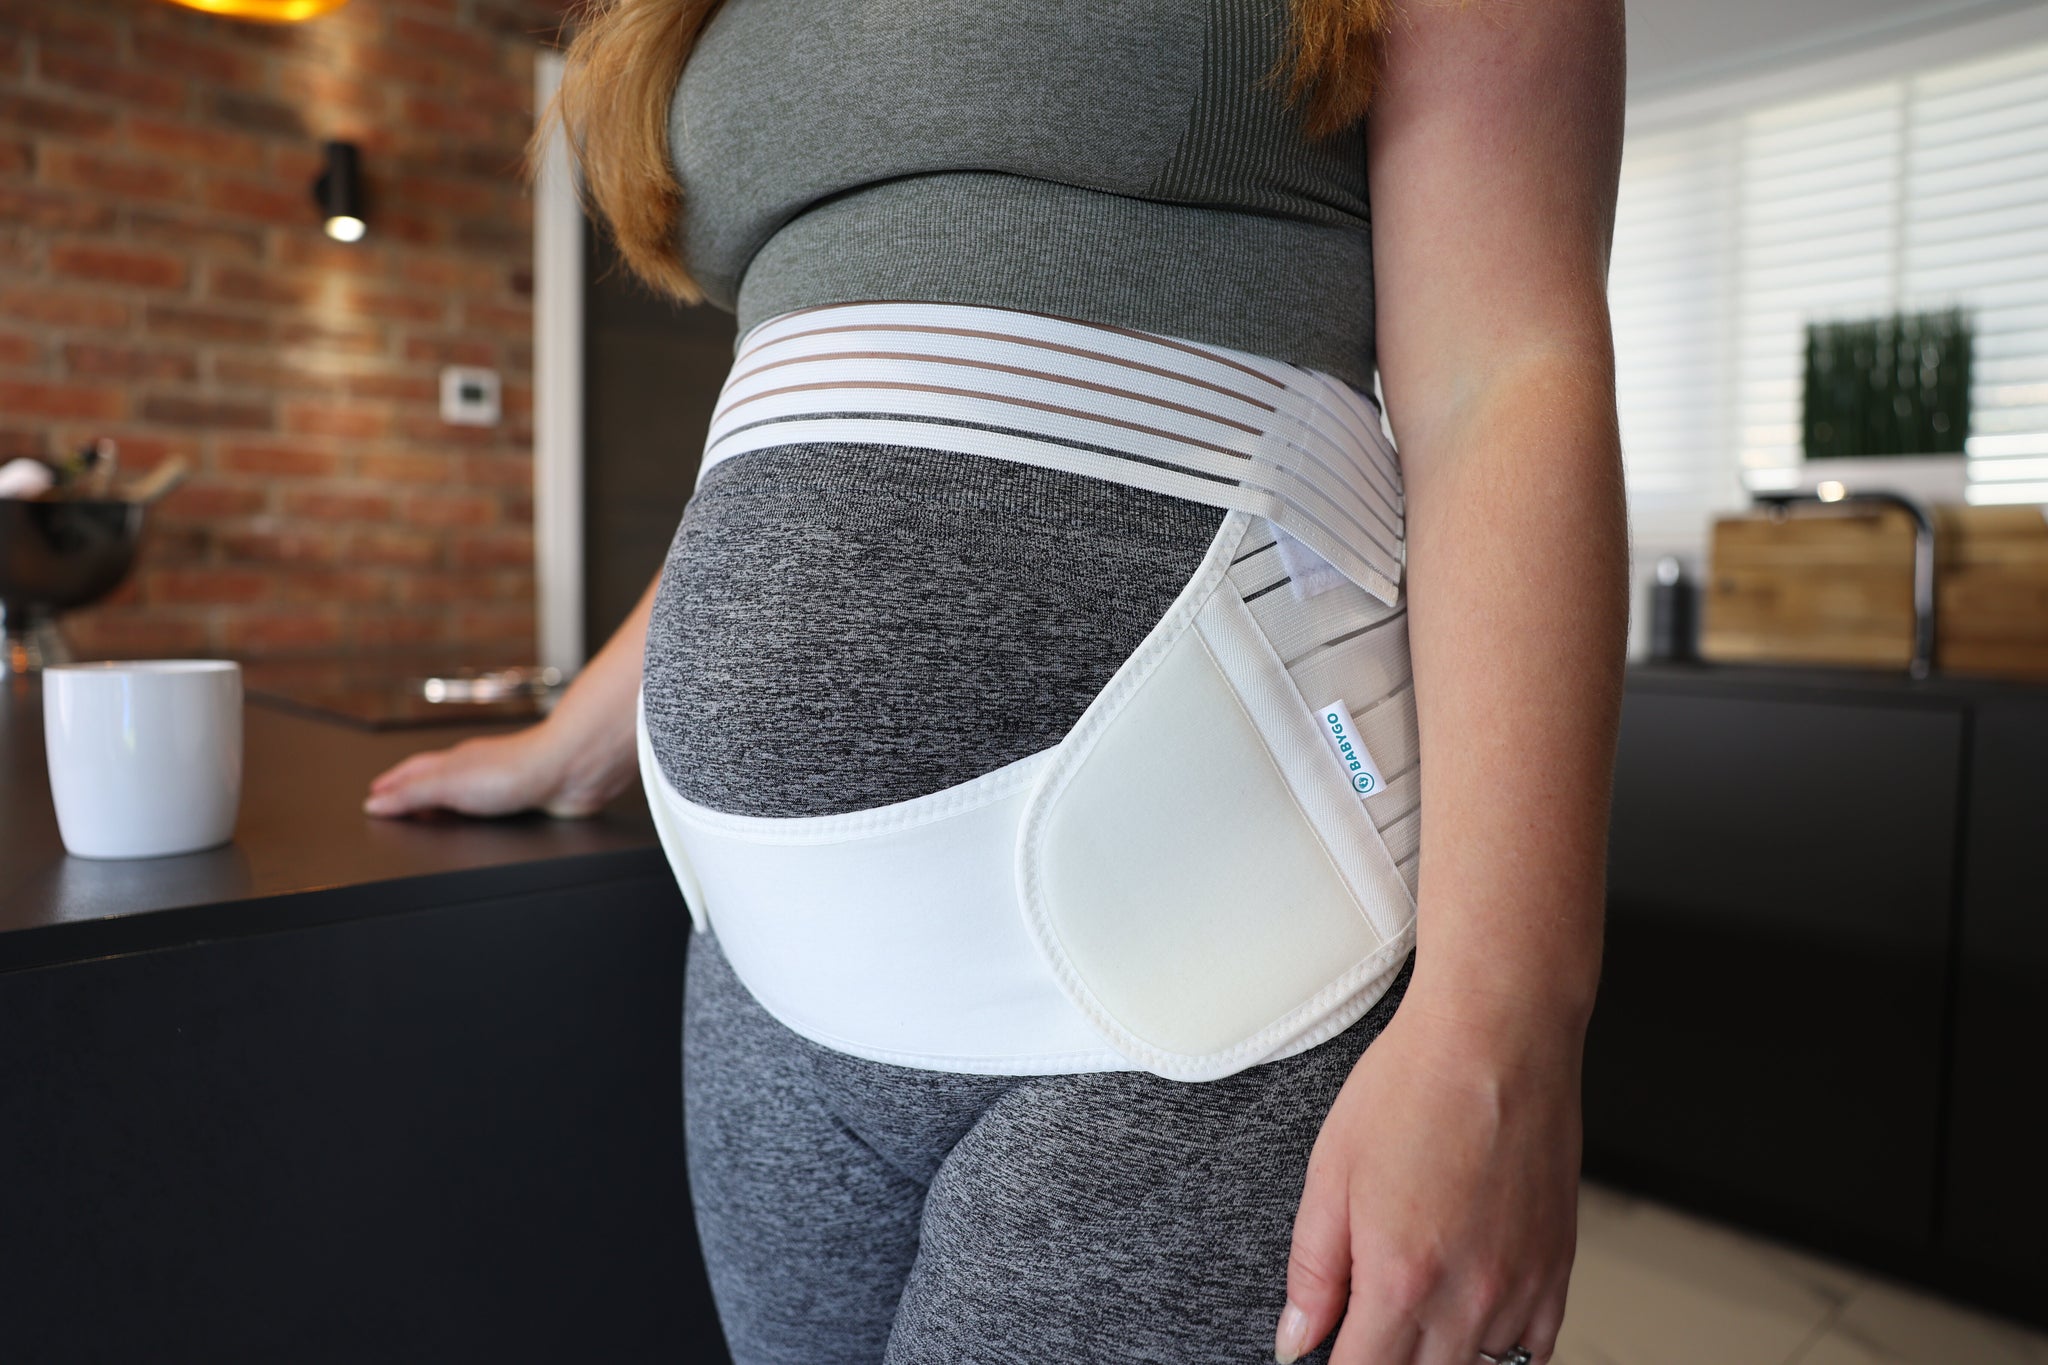 Motif Medical pregnancy support band review: Our honest thoughts